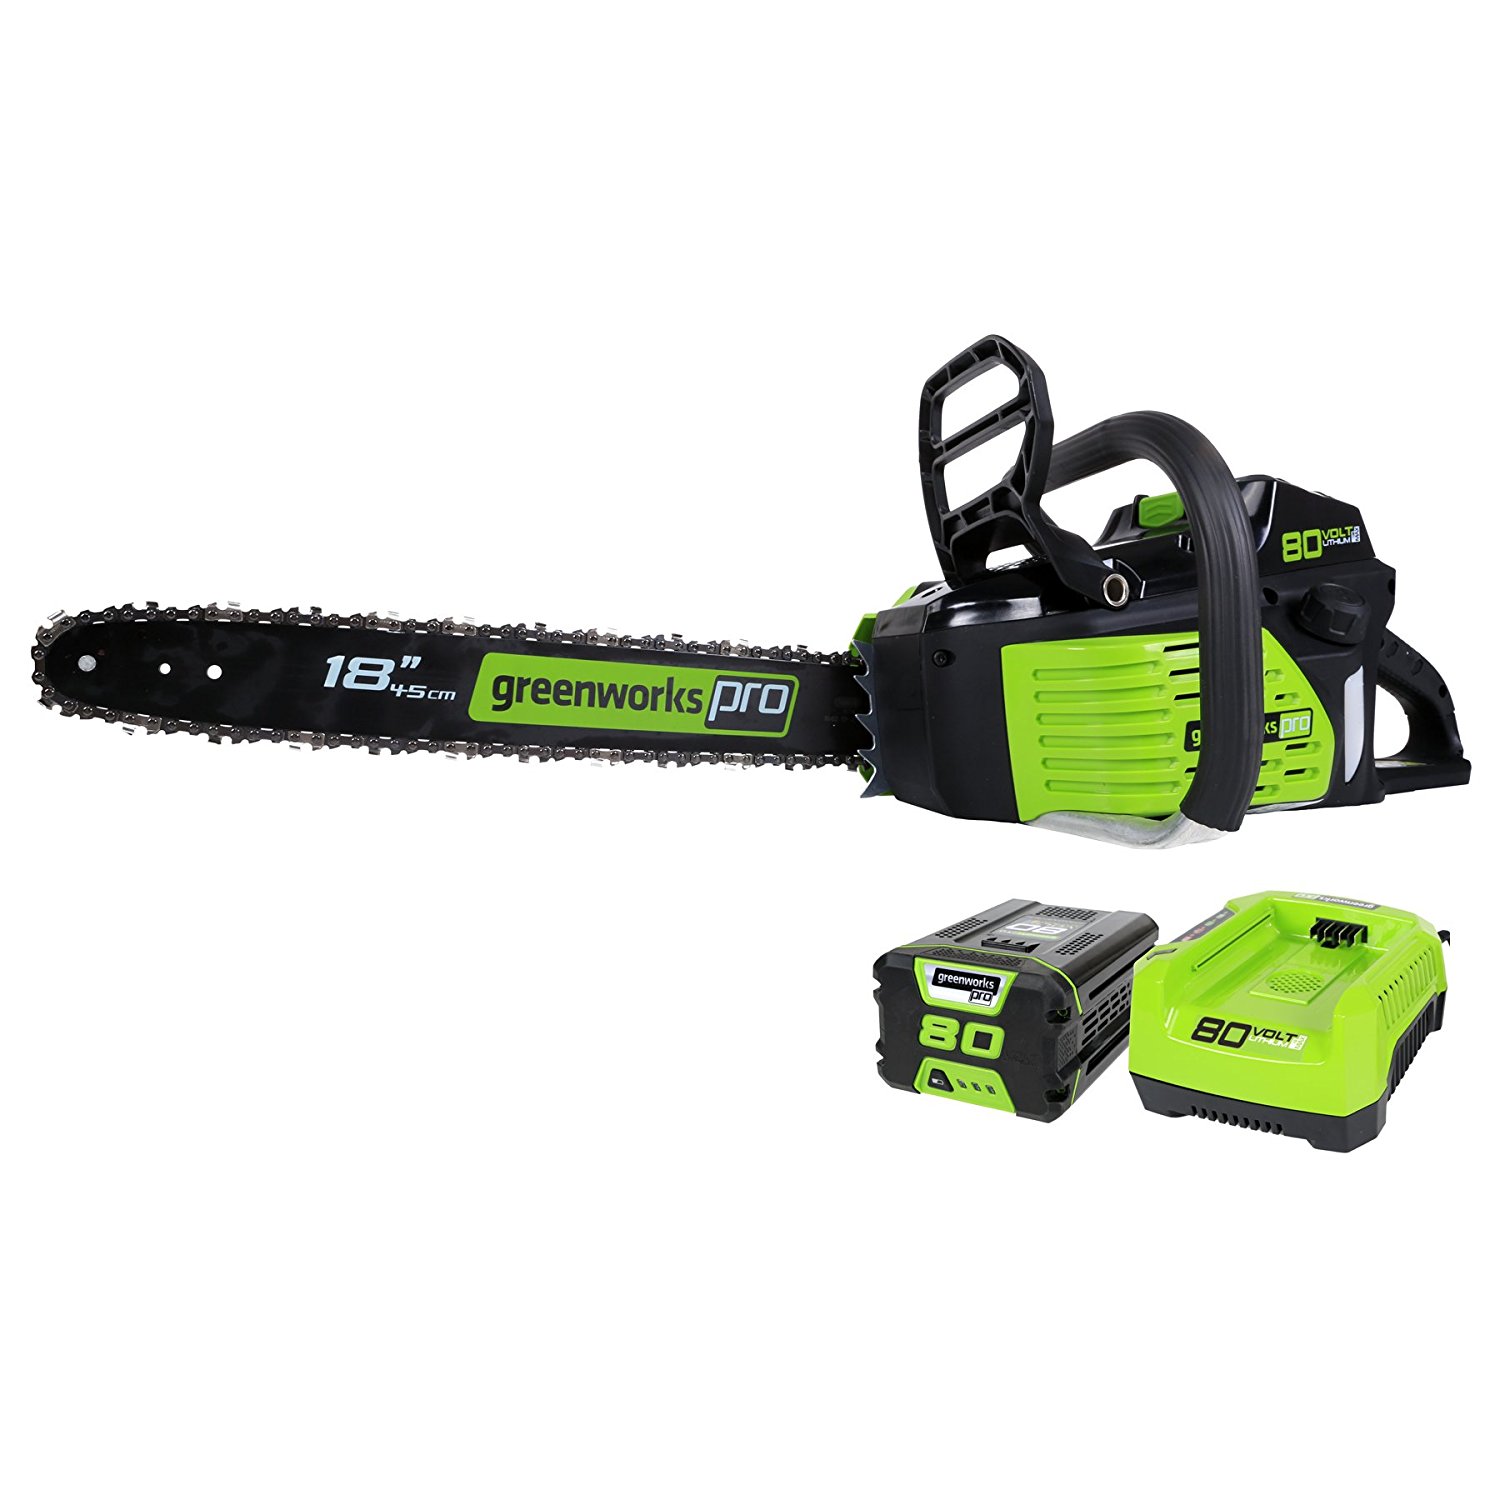 Discontinued - Greenworks Pro 18-Inch 80V Cordless Lithium-Ion Chainsaw, Battery and Charger Included GCS80421 - image 1 of 5